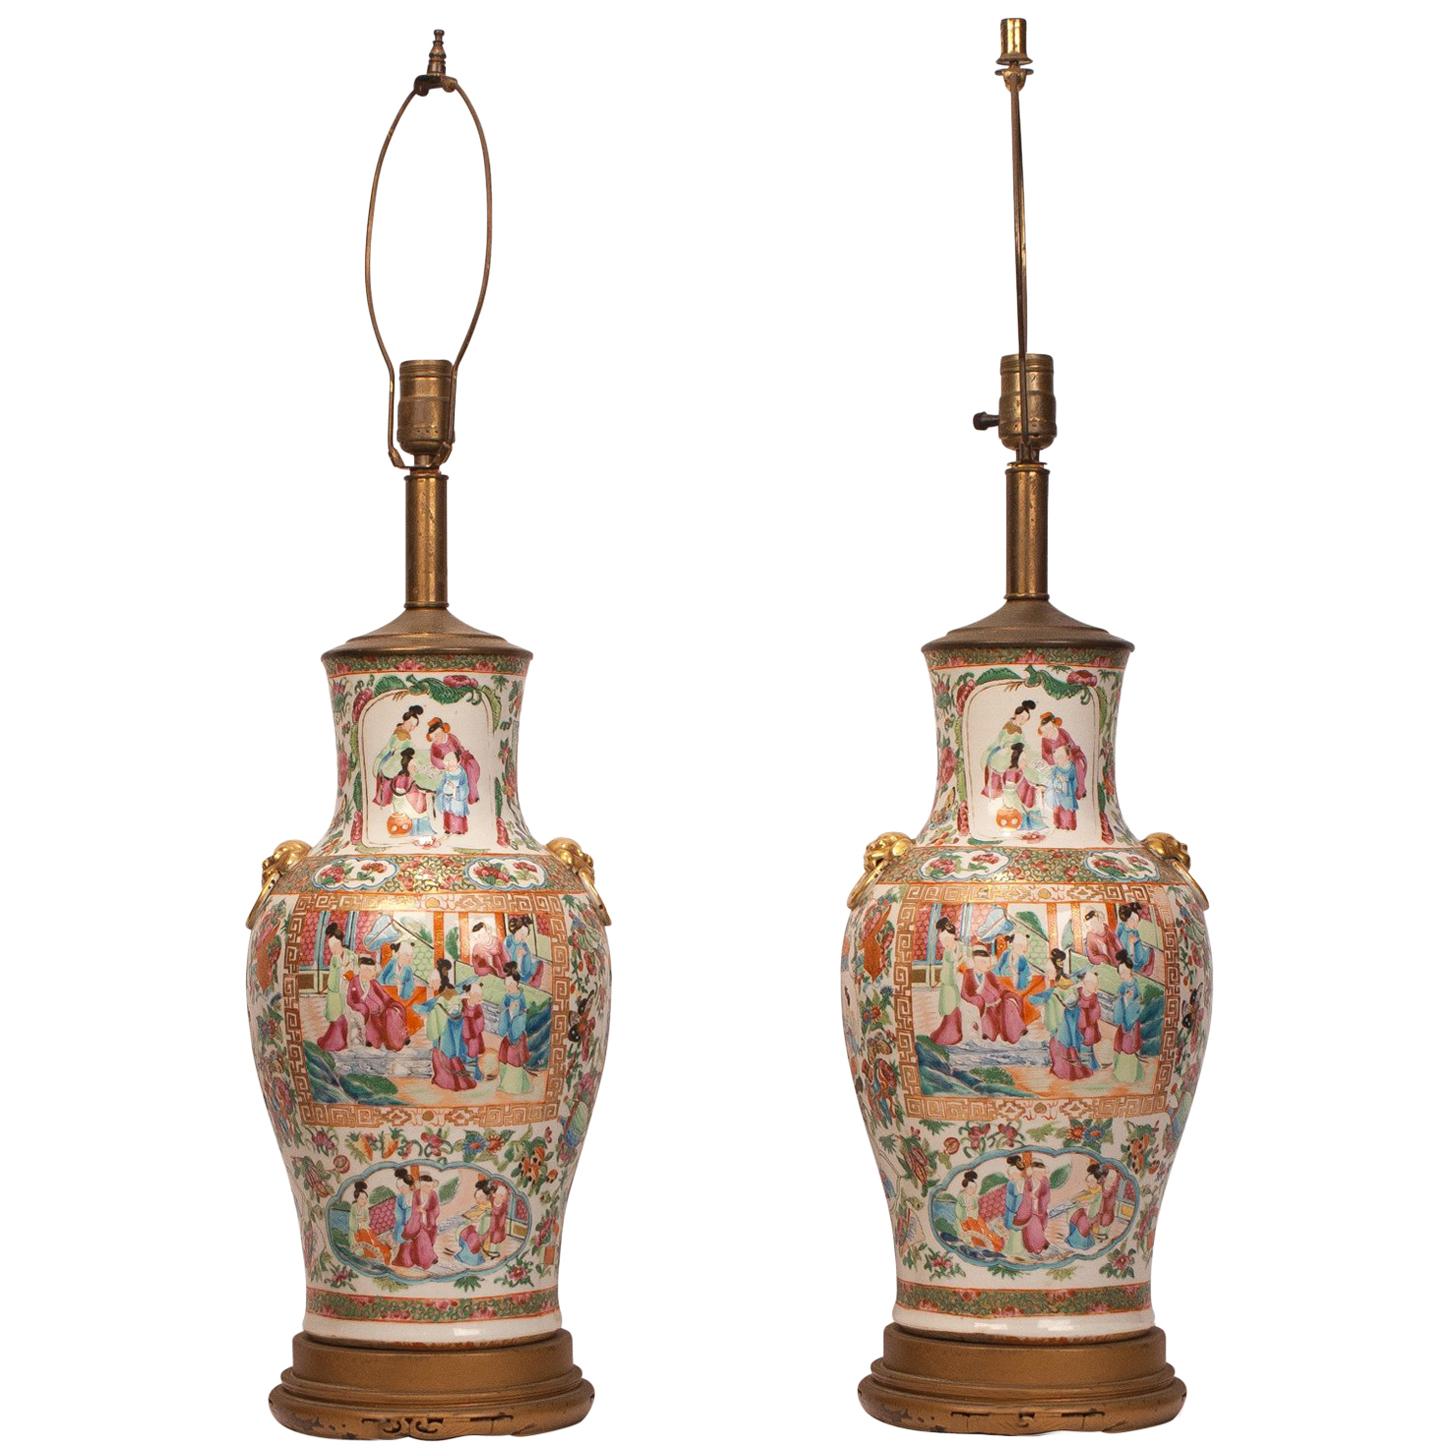 Large Pair of Rose Medallion Vases, Later Mounted as Lamps, China, circa 1850